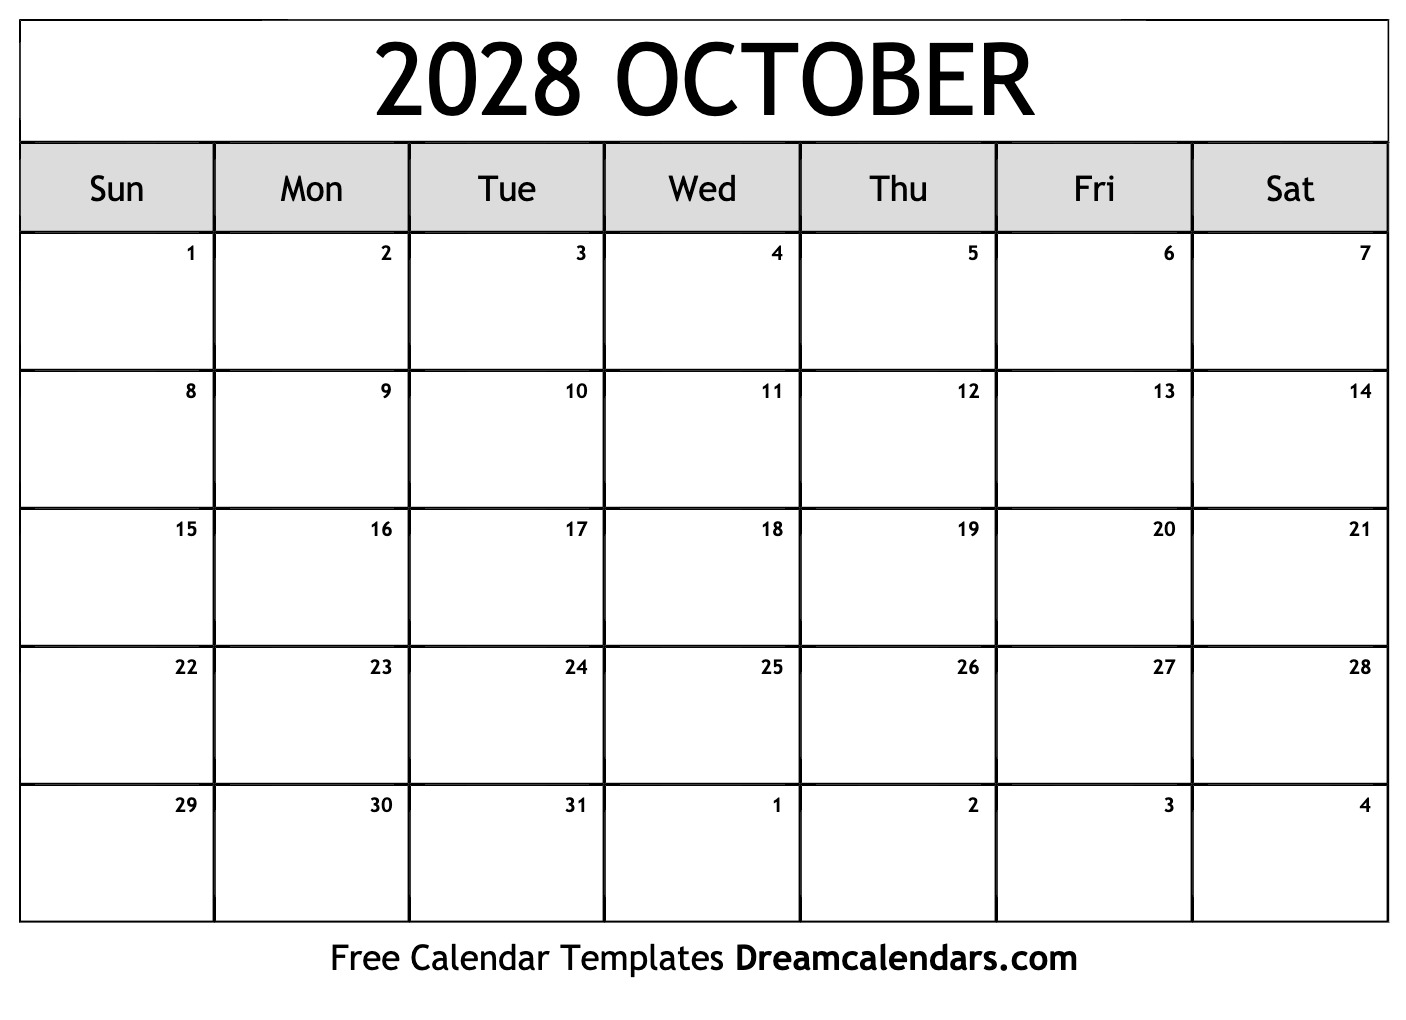 October 2028 Calendar Free Printable with Holidays and Observances